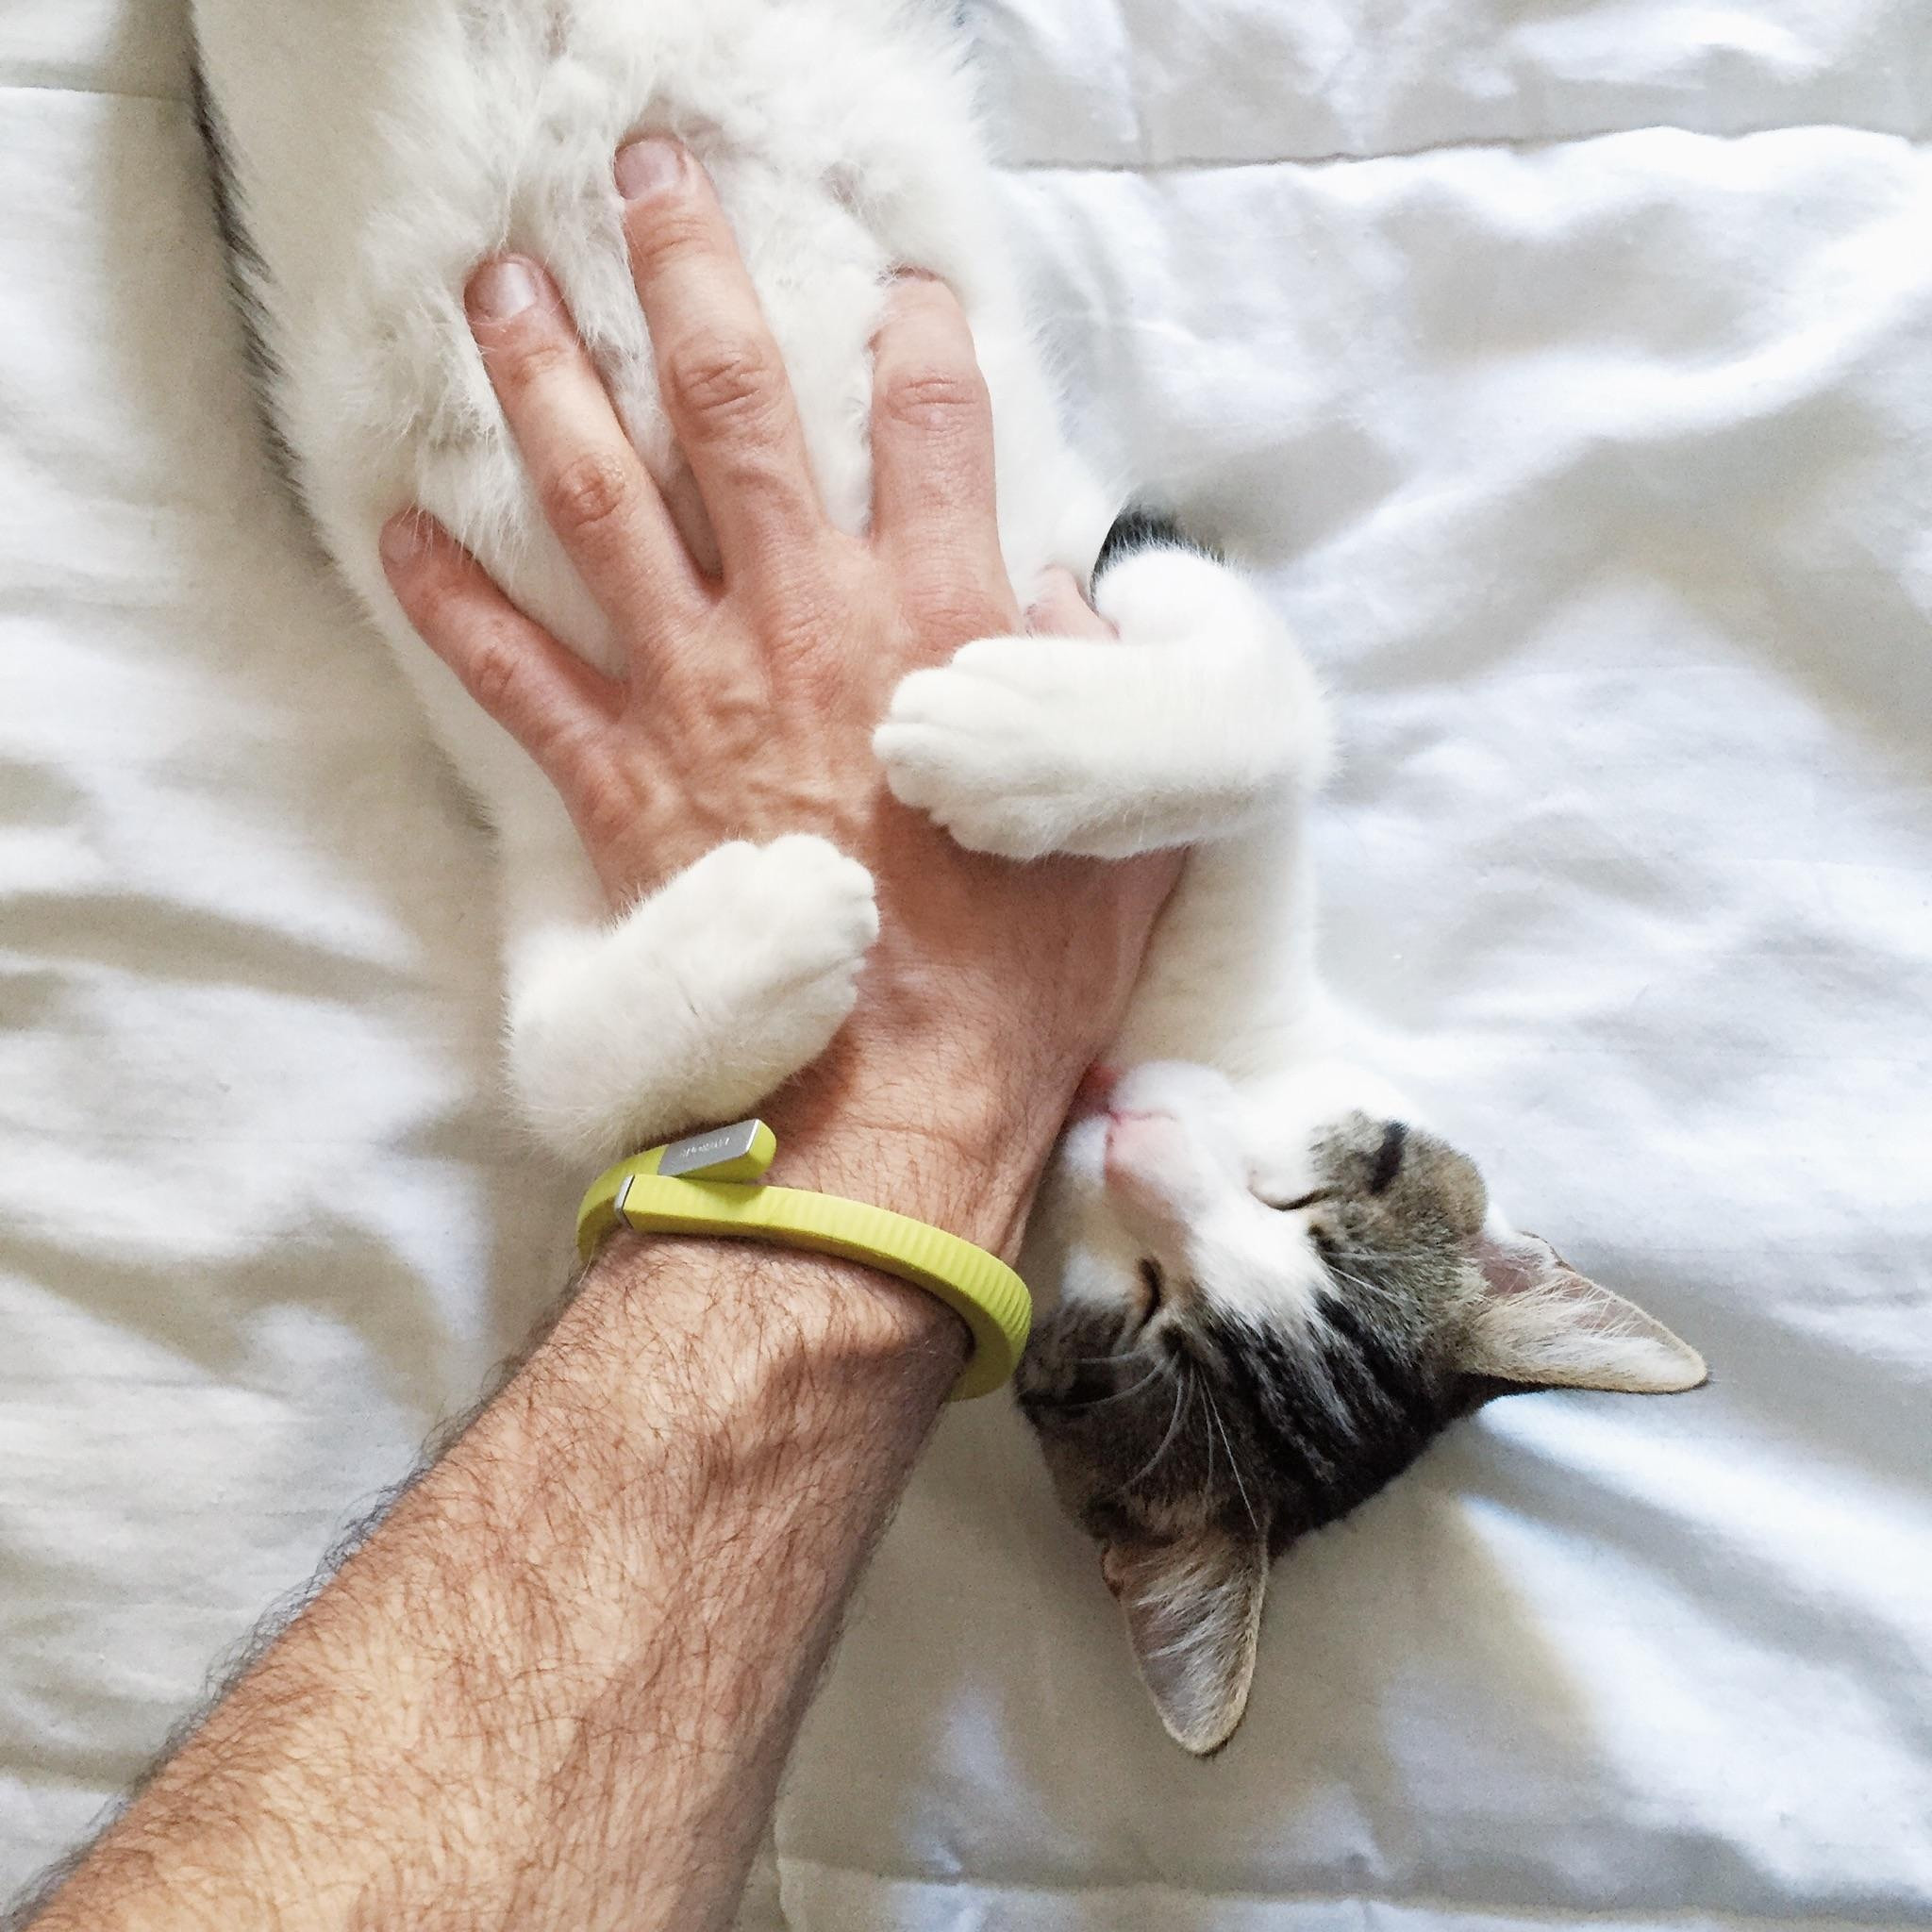 So You’re a Mixed Knowledge Brainiac? Prove It by Getting at Least 18/24 on This Quiz Cat getting belly rub